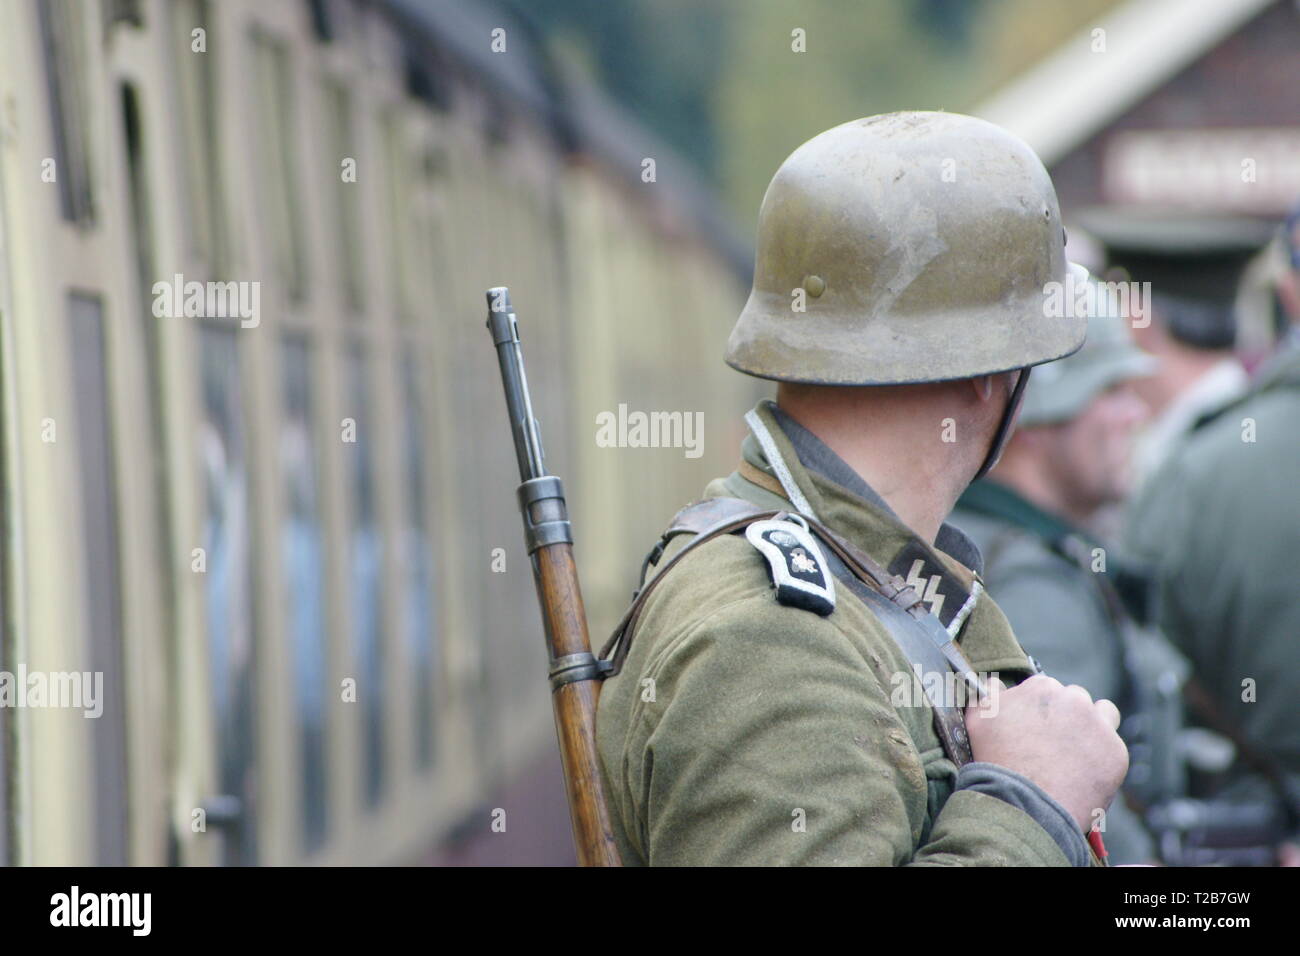 Waffen-SS soldier, Holocaust, Auschwitz concentration camp Stock Photo